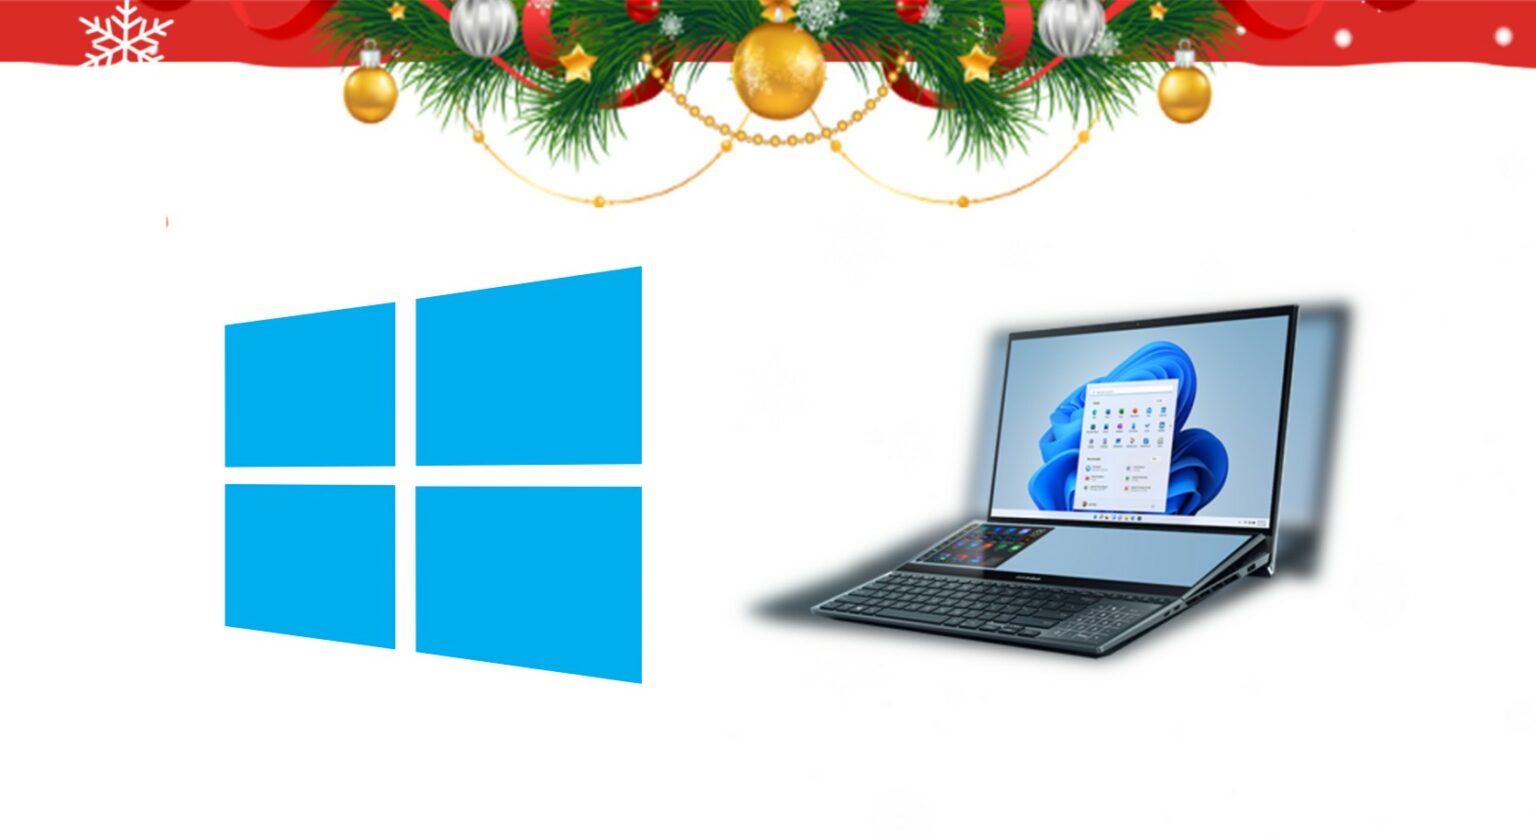 When you buy Windows 10 at CDKeylord.com, you get a free upgrade to Windows 11.